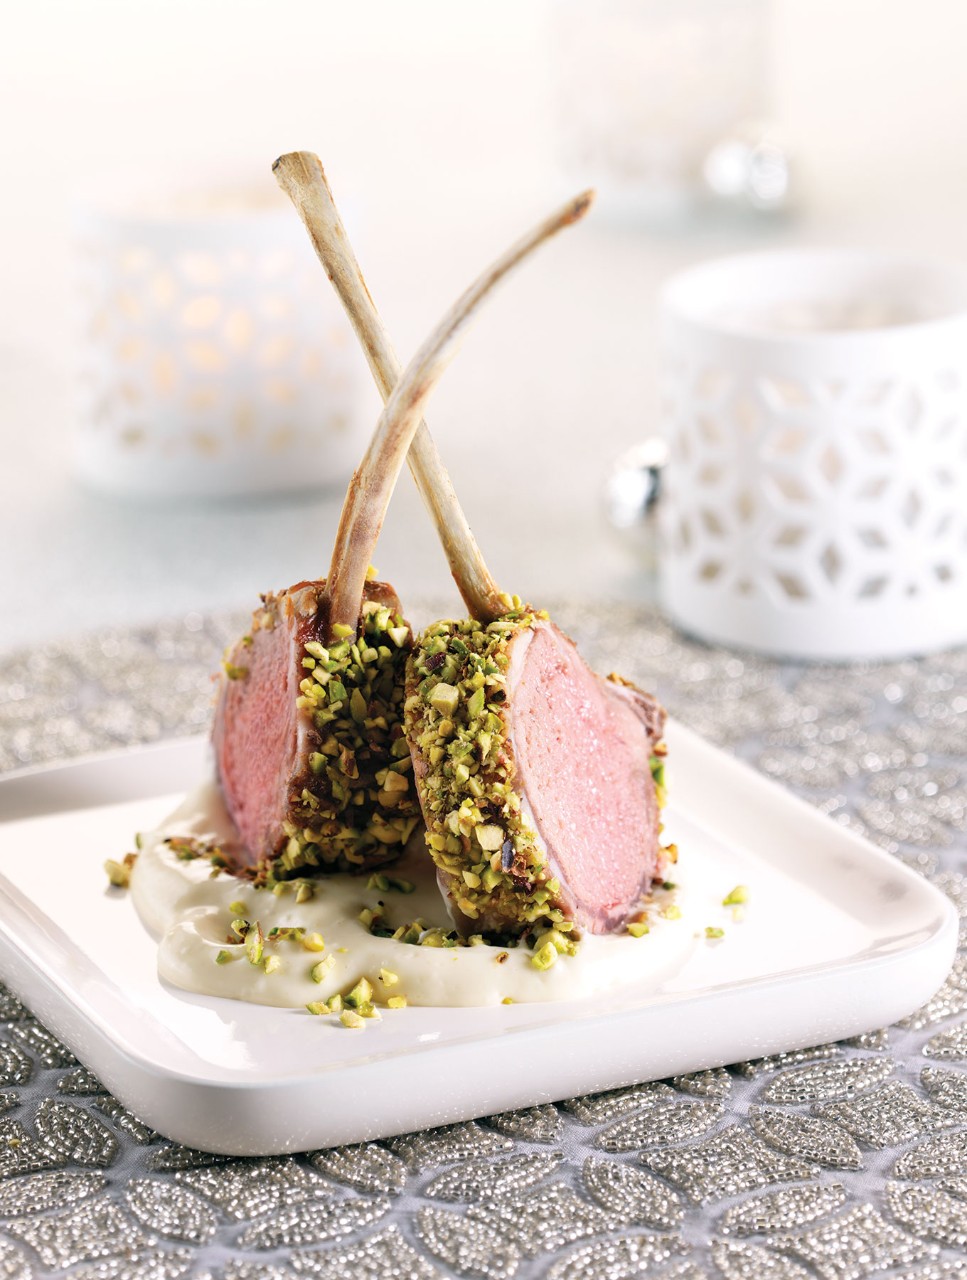 Moroccan-Spiced Lamb Lollipops with Pistachios and Garlicky Dip